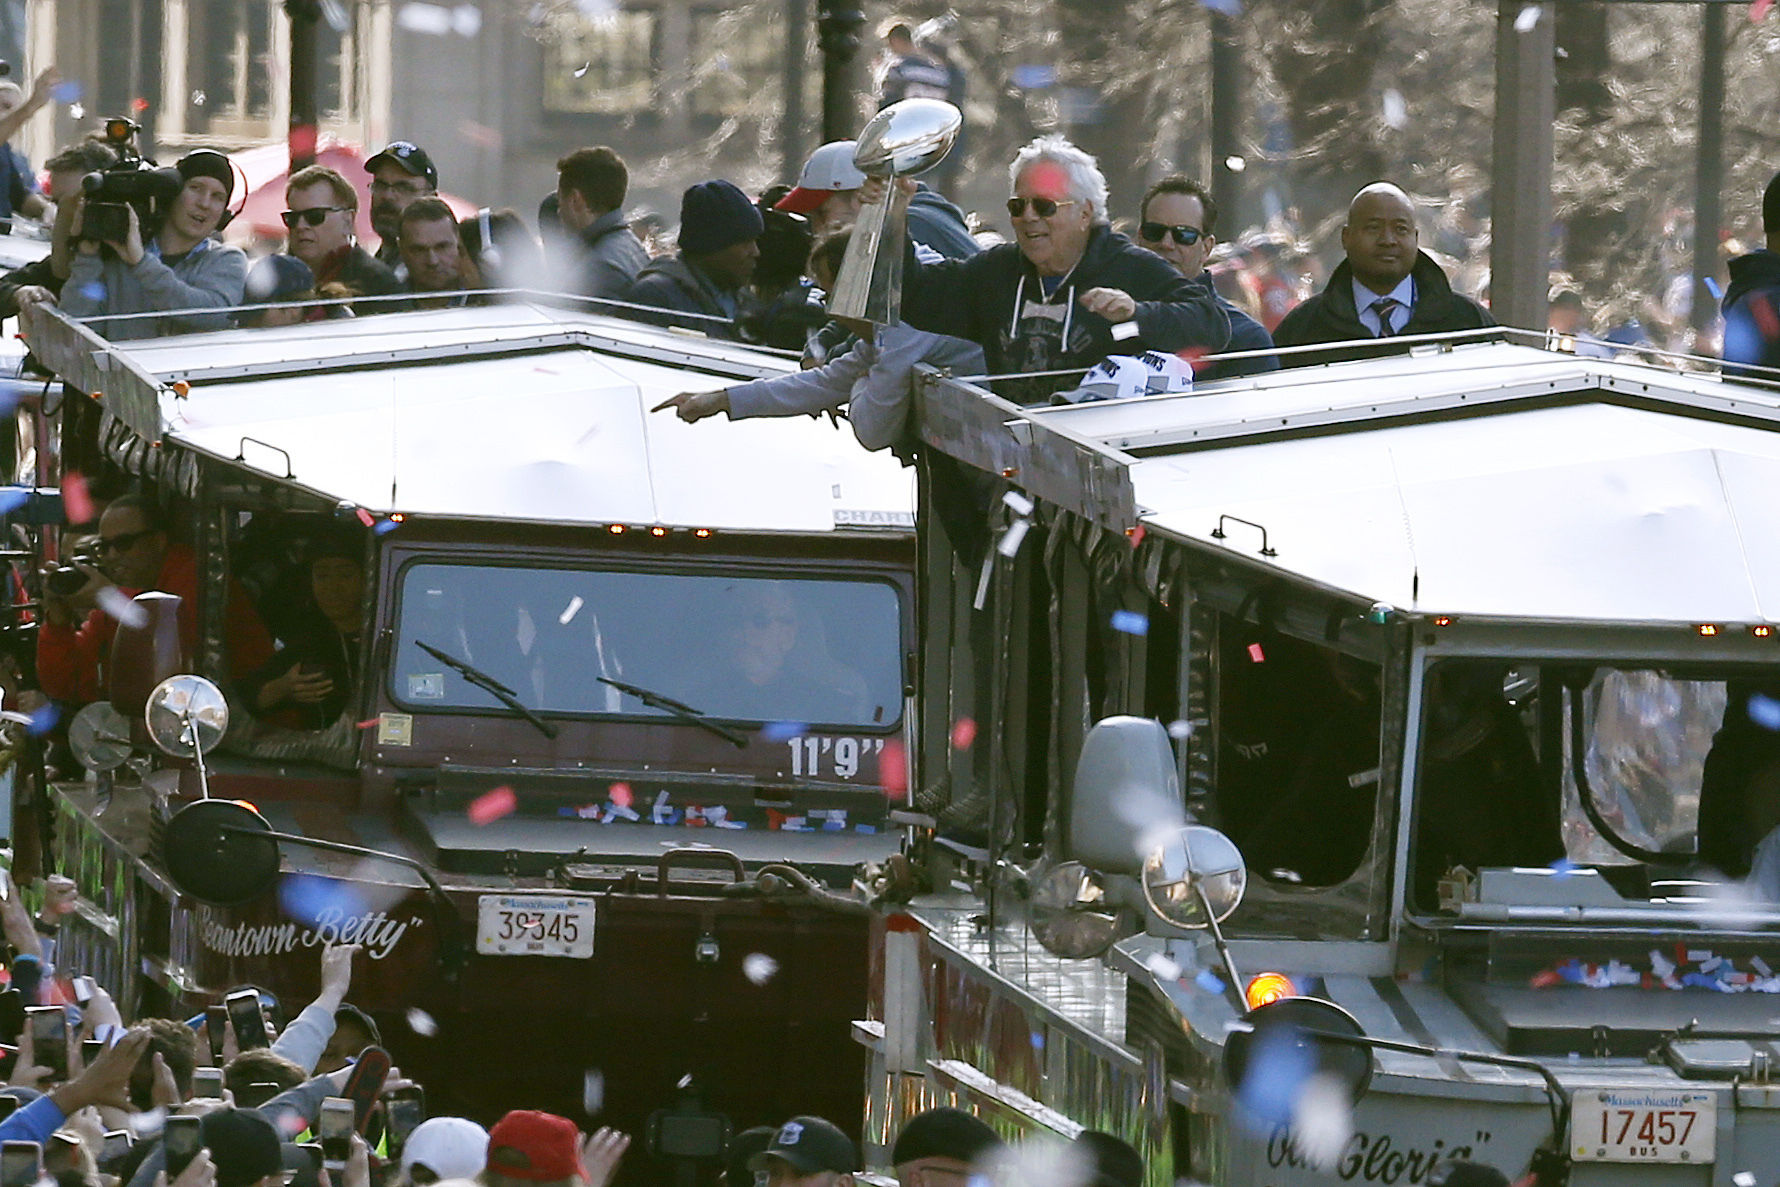 New England Patriots owner Robert Kraft holds the trophy as the team parades through downtown Boston, Tuesday, Feb. 5, 2019, to celebrate their win over the Los Angeles Rams in Sunday's NFL Super Bowl 53 football game in Atlanta. (AP Photo/Michael Dwyer)